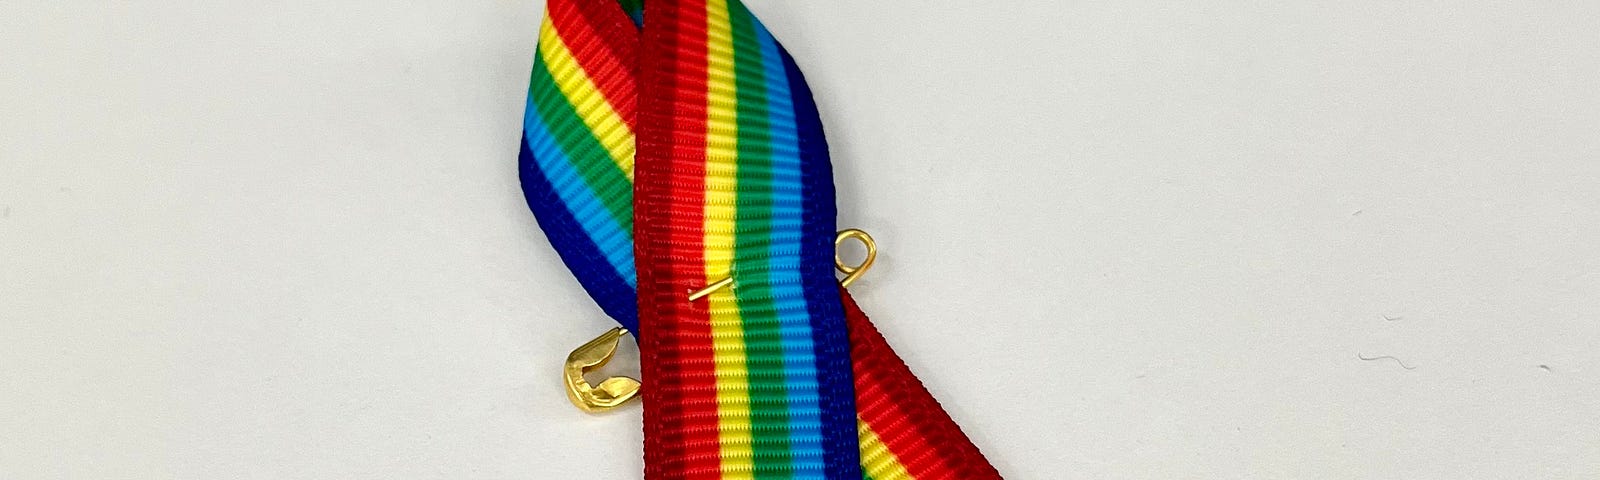 A rainbow ribbon secured with a safety pin.